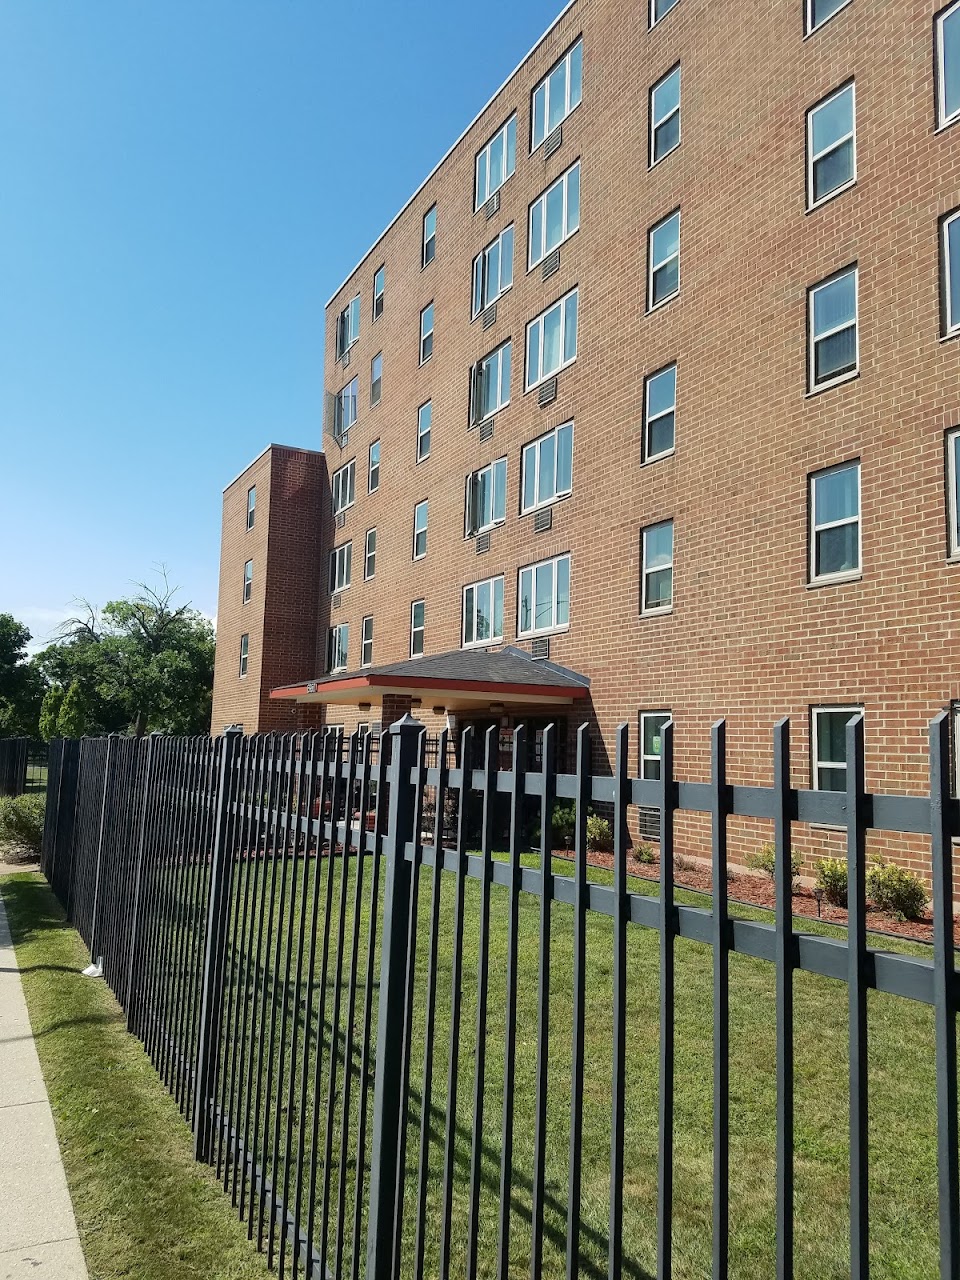 Photo of LAFAYETTE TERRACE APARTMENTS. Affordable housing located at 6956 S VINCENNES AVE CHICAGO, IL 60621